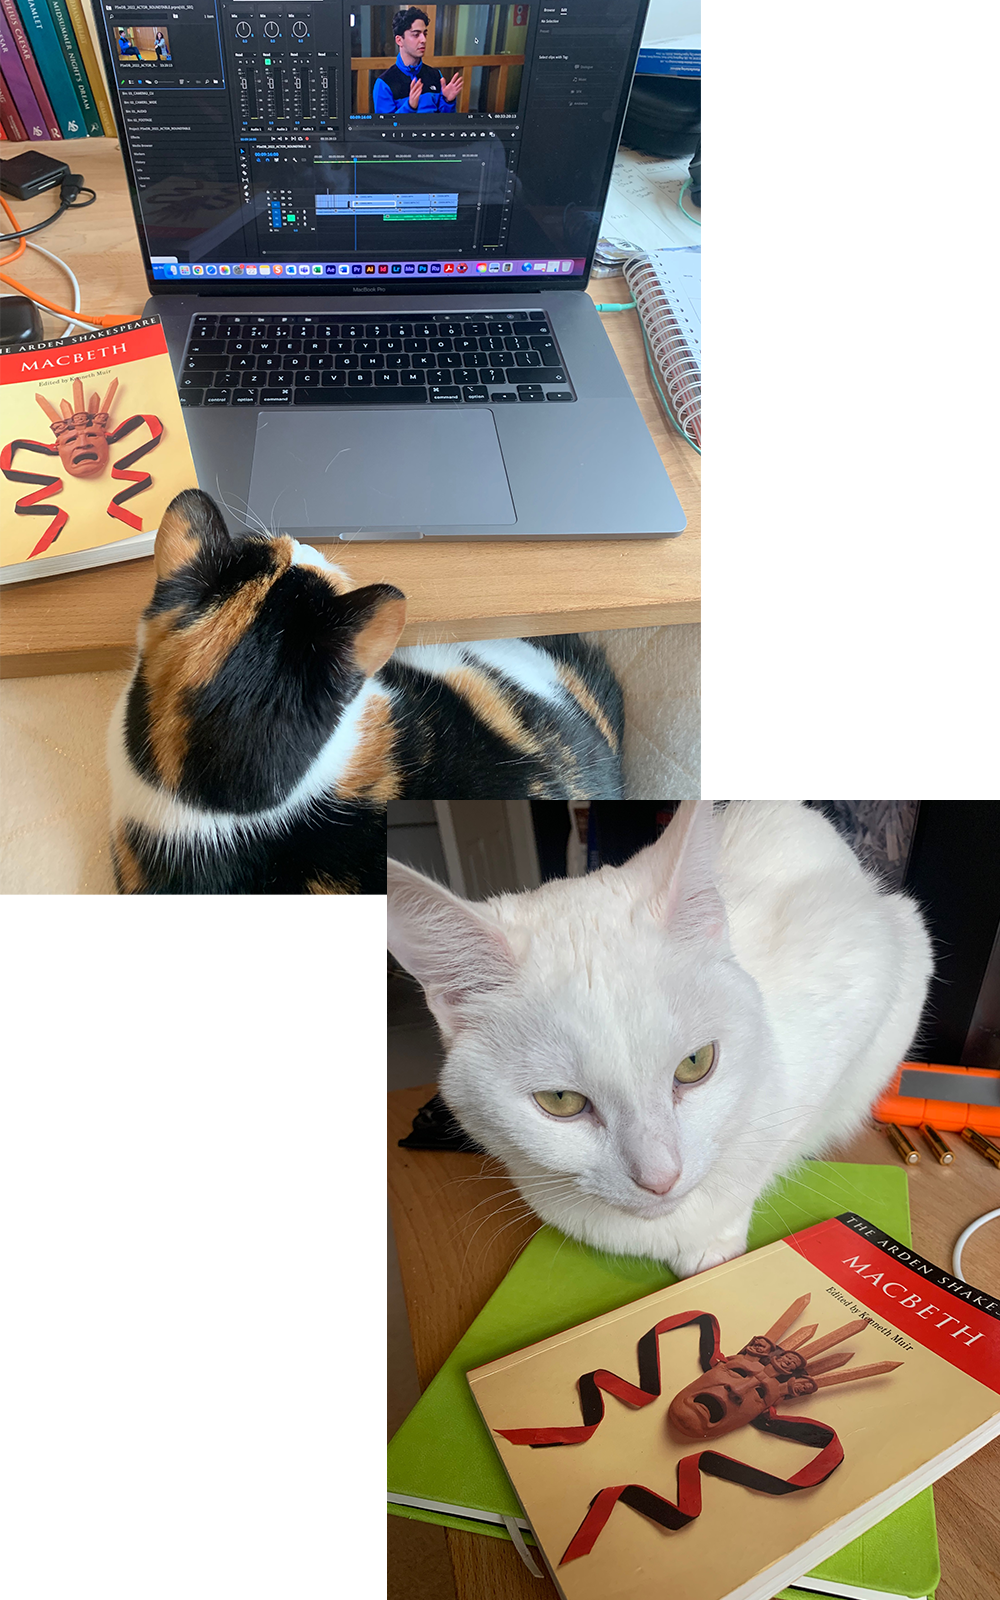 Top left is a brown and white cat on a laptop, bottom right is a pure white cat reading Macbeth